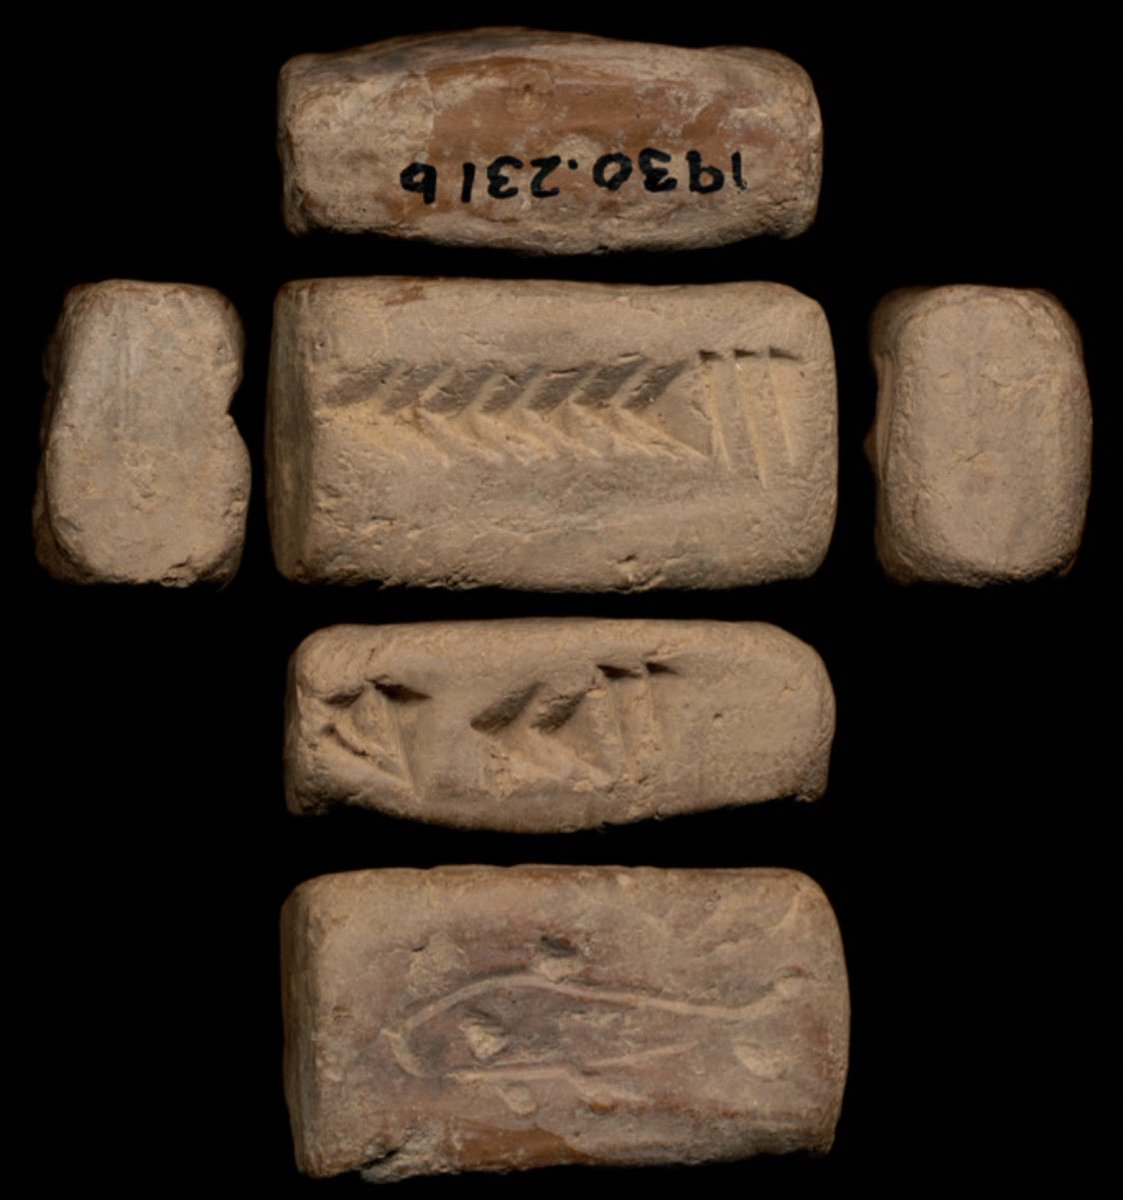 Yes, clay tablets made by young scribal students at schools in ancient Assyria and Babylonia are absolutely the most adorable thing ever, thank you for asking.I mean, look at these things. One even has a doodle (maybe) of a fish. They are relatable and lovely.